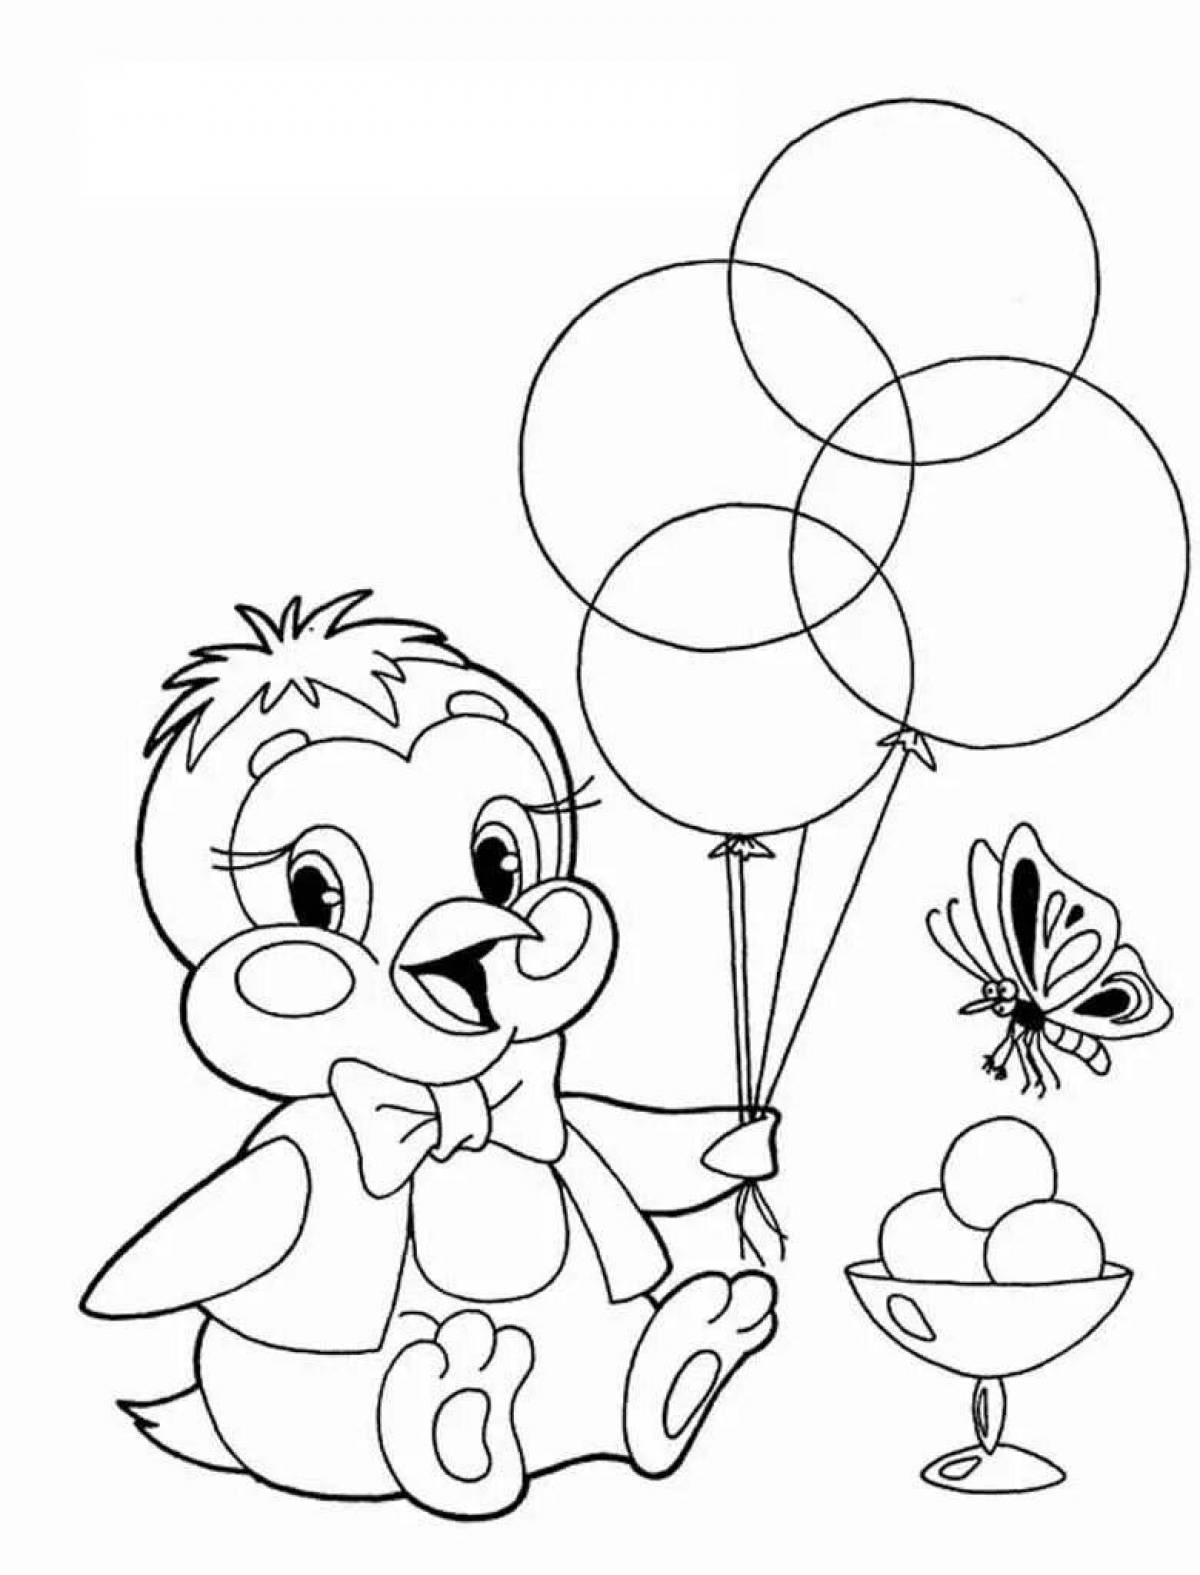 Adorable coloring book for preschoolers 4-5 years old